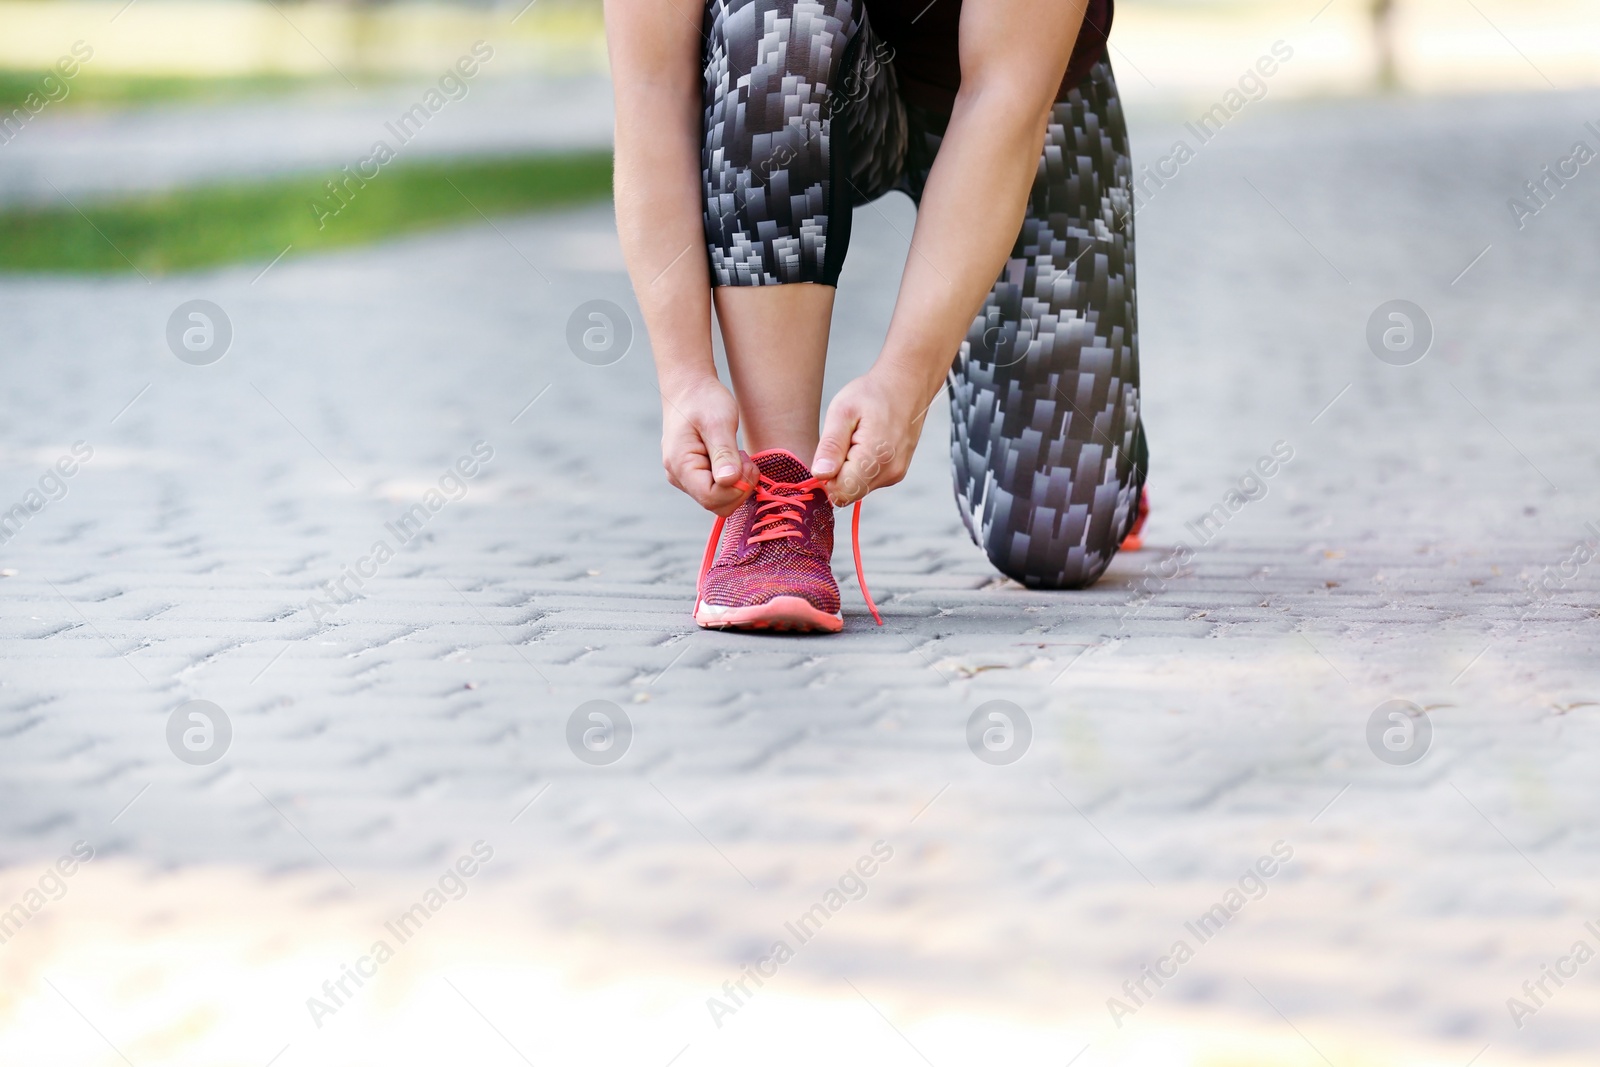 Photo of Young woman tying shoelaces before running outdoors, focus on legs